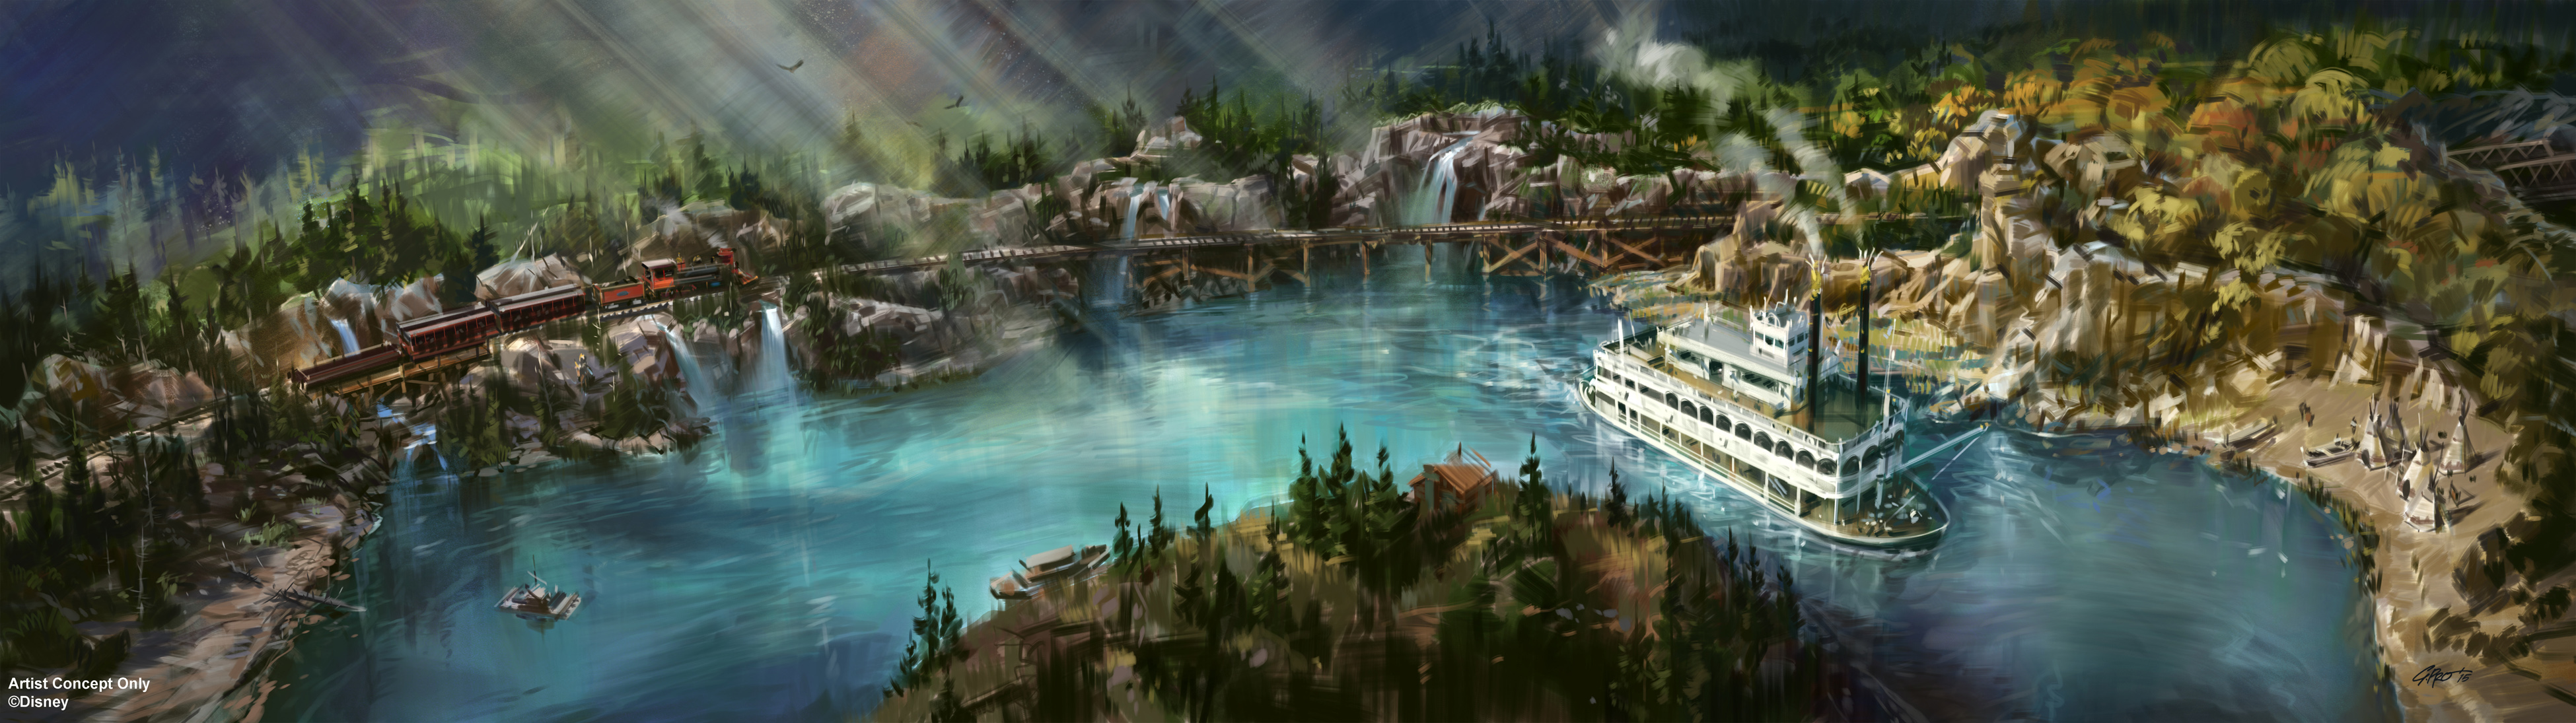 Disneyland releases art showing new look for shortened RIVERS OF AMERICA